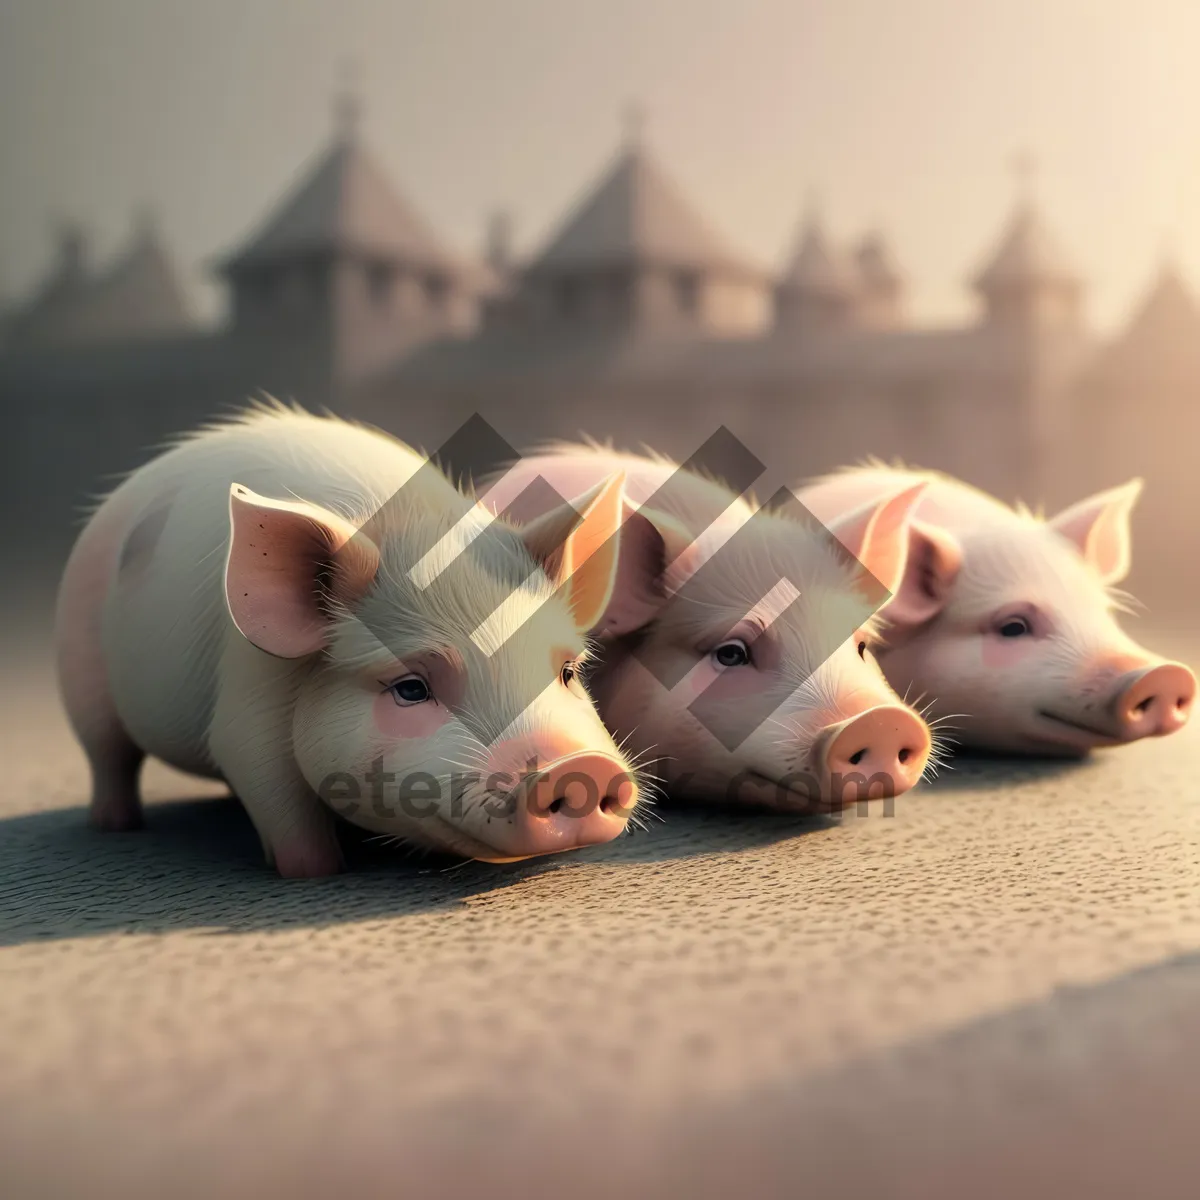 Picture of Piggy Bank Savings: Investing in Financial Wealth